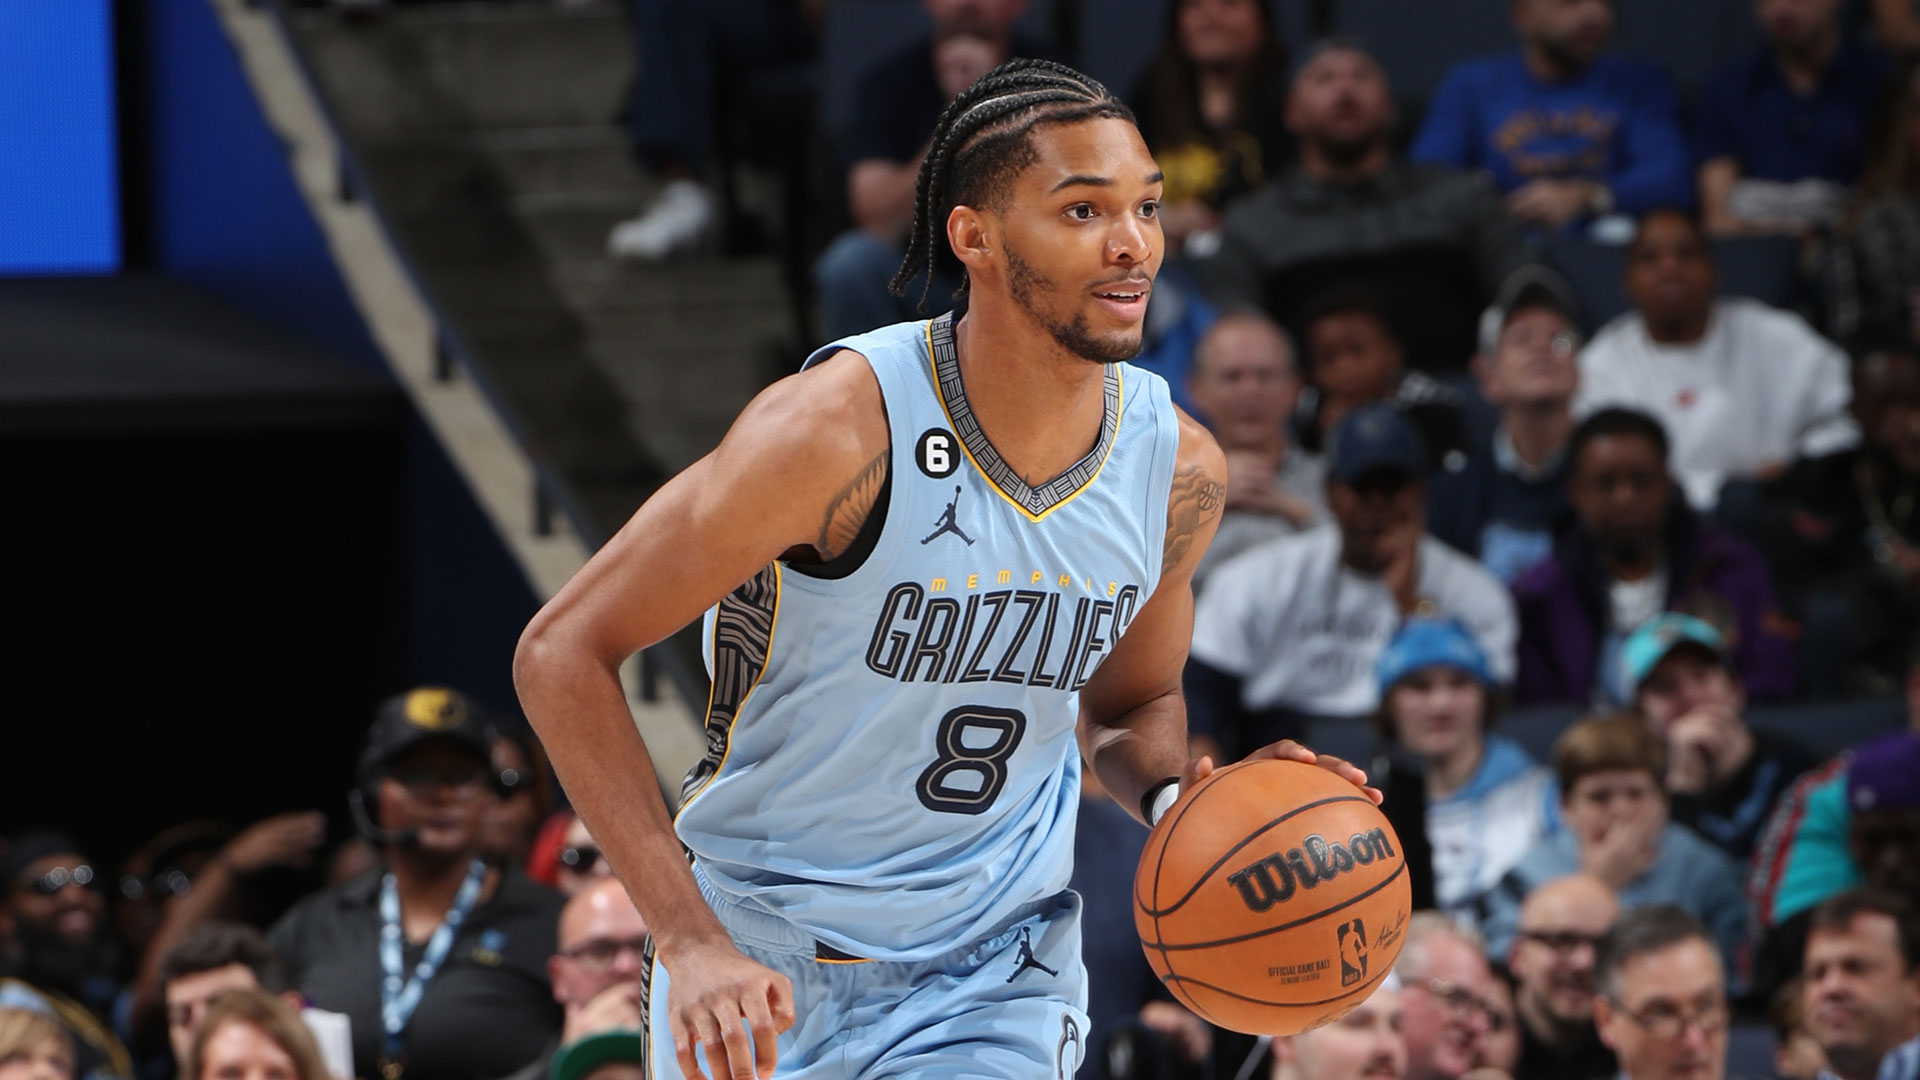 MikeCheck: Grizzlies rise to best in West with no plans to rest on laurels  fueling ascent